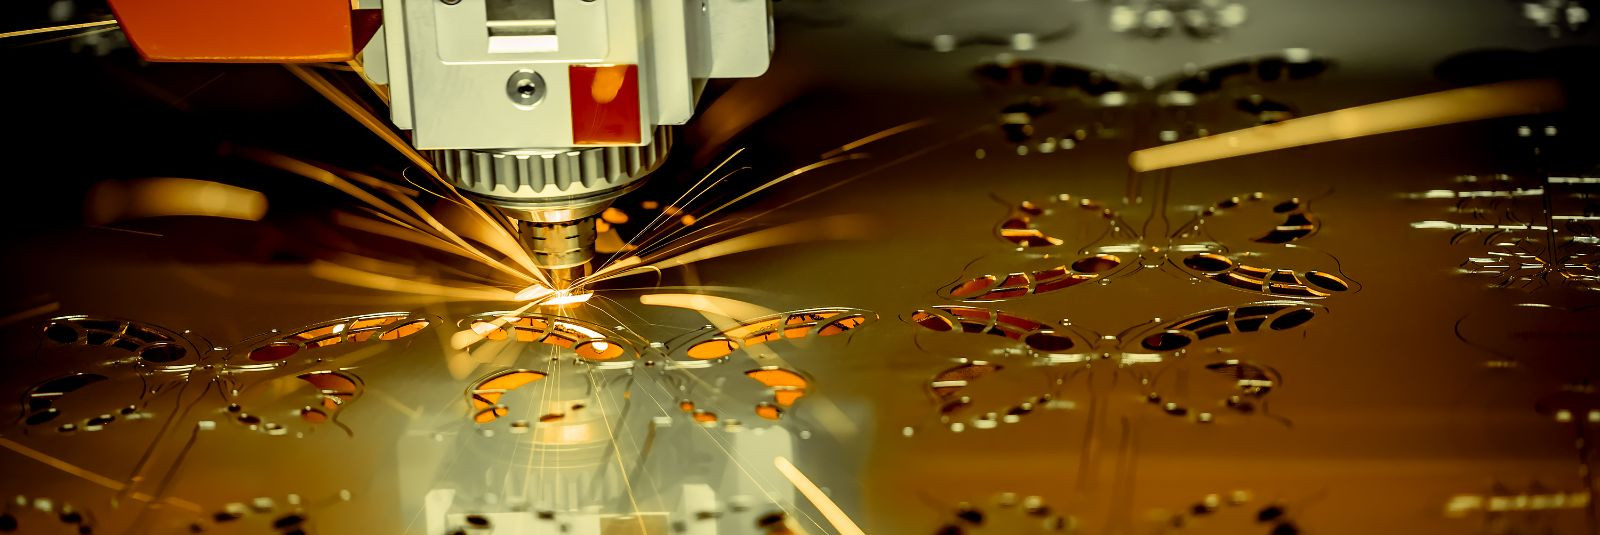 When it comes to sheet metal fabrication, precision and efficiency are key. That\'s why RGR Airon OÜ offers oxy-fuel CNC cutting technology to revolutionize the